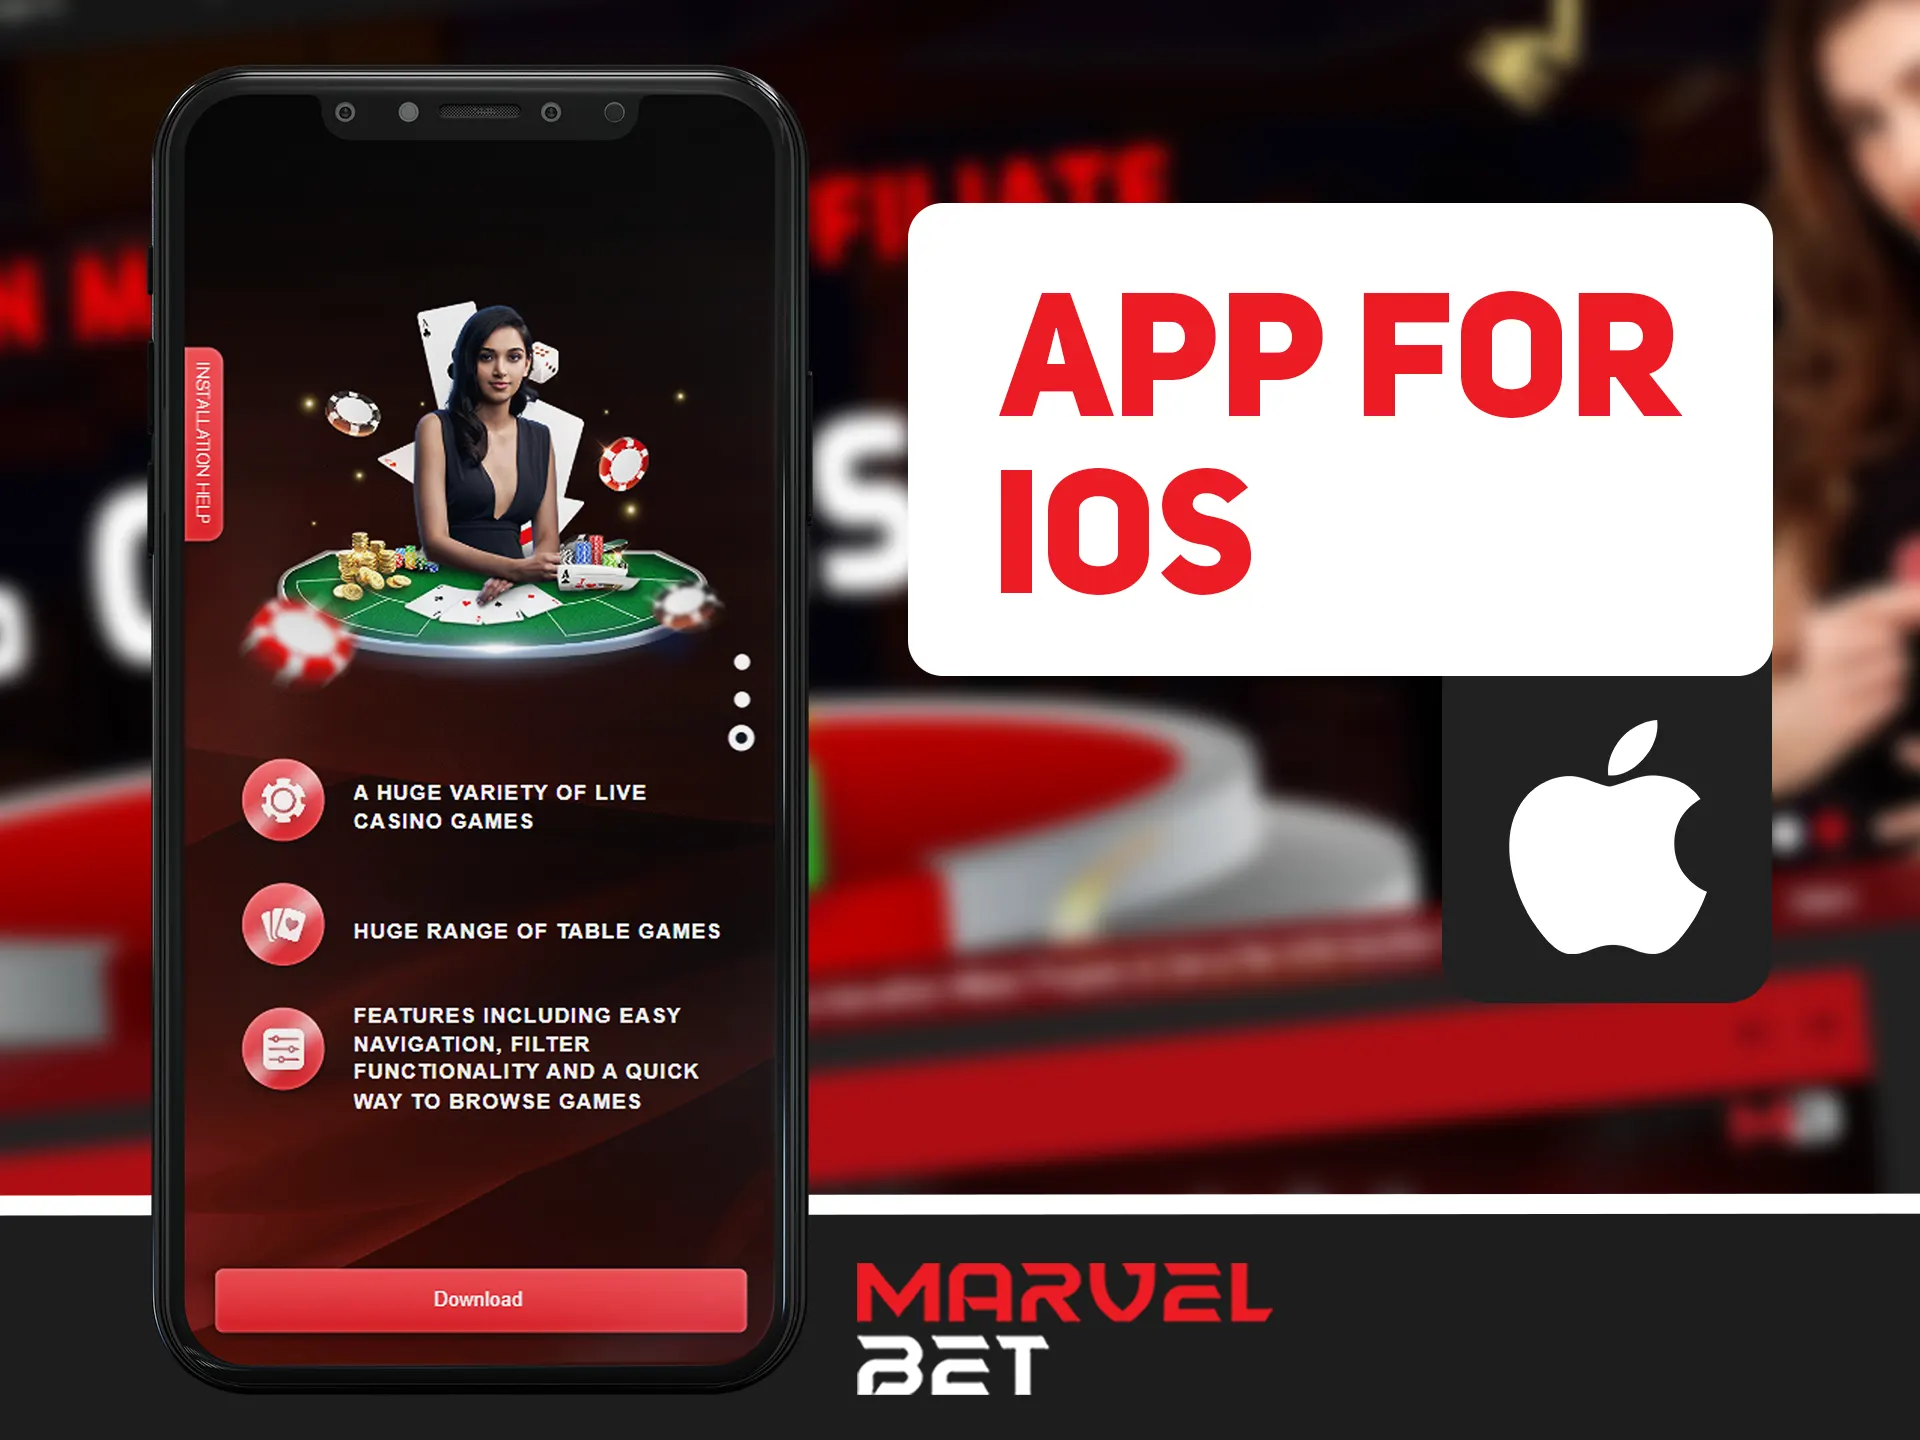 Install Marvelbet app on any of your iOS devices.